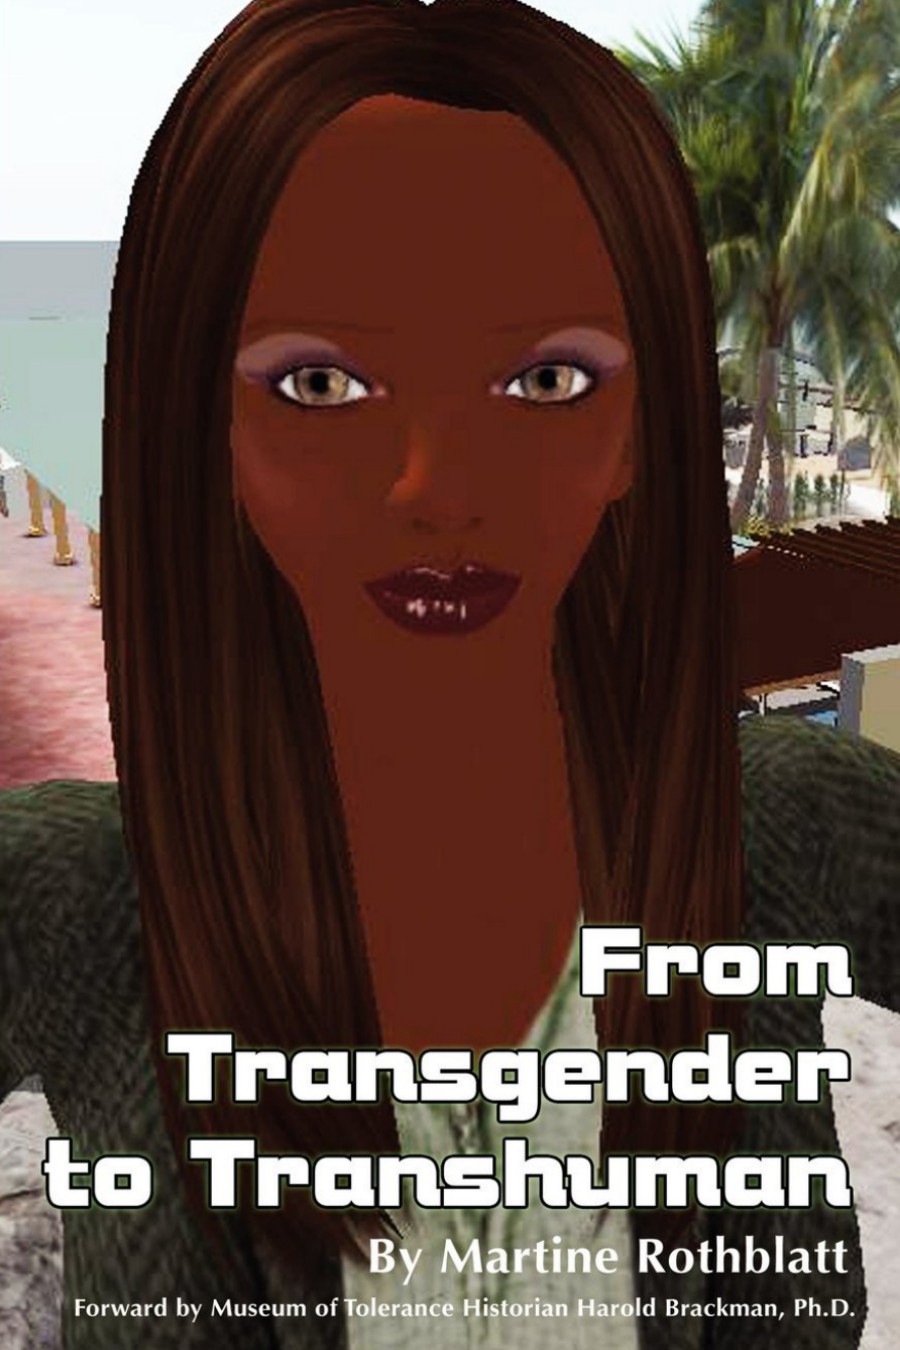 From Transgender to Transhuman: A Manifesto on the Freedom of Form